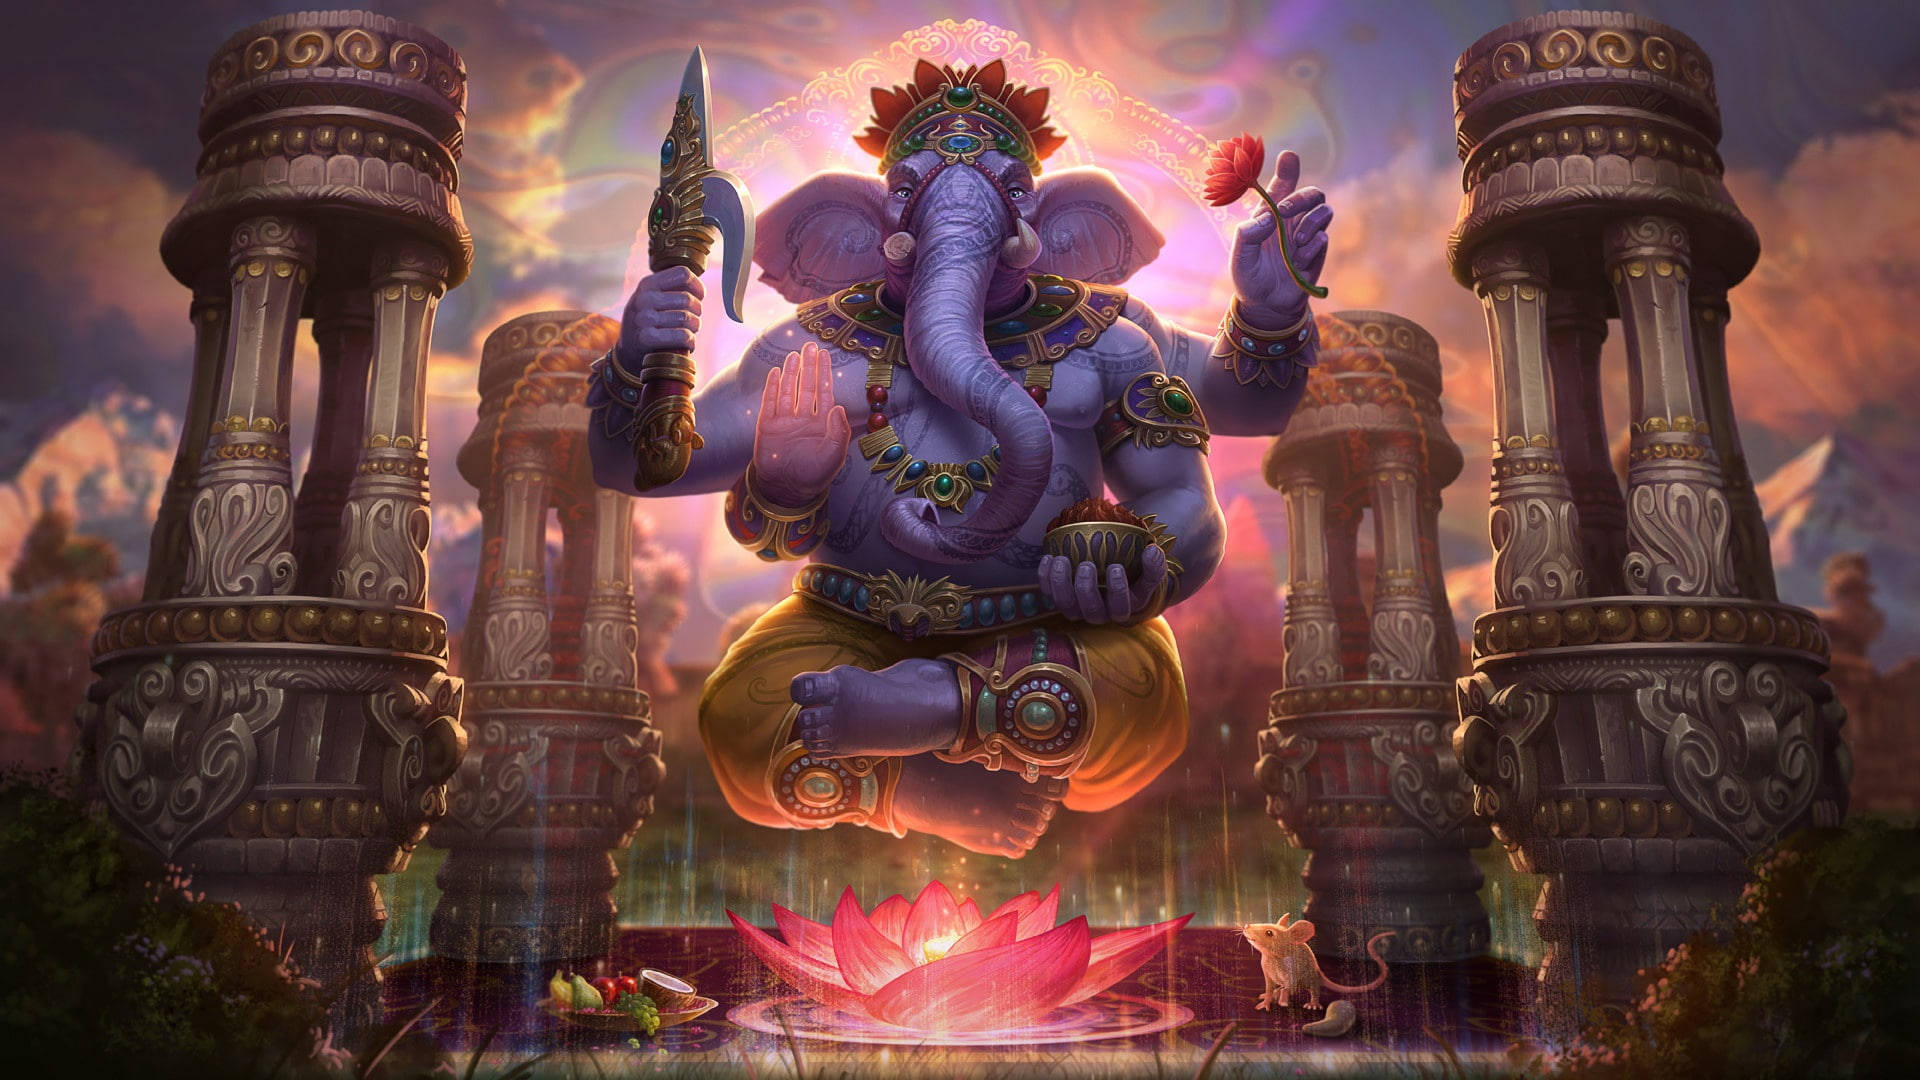 19 Ganesh Images Hd Wallpapers Images, Stock Photos & Vectors | Shutterstock